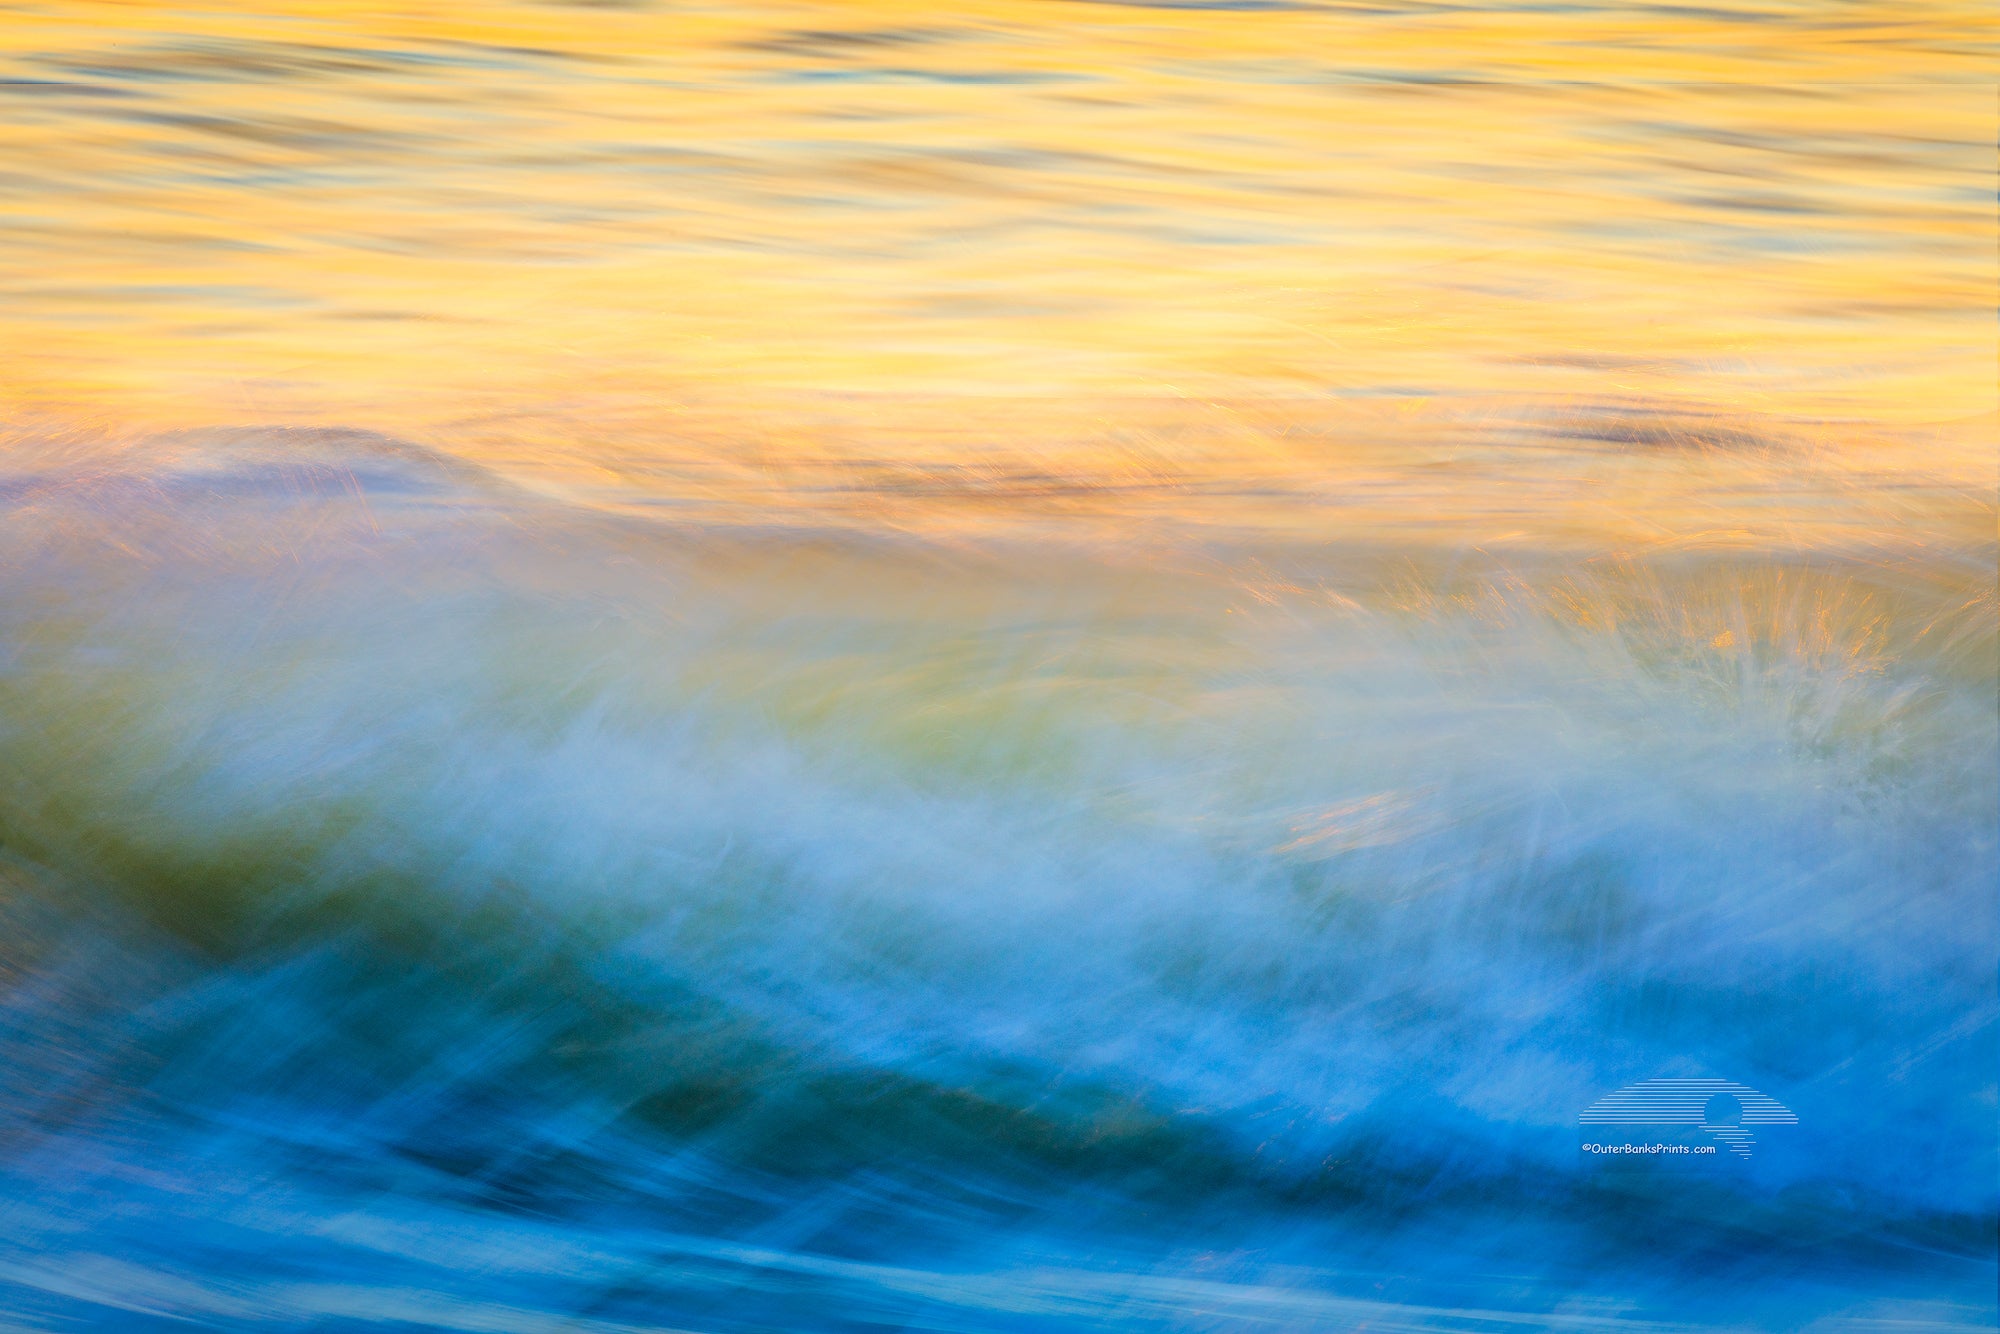 Moving wave impression at sunrise on the Outer Banks of North Carolina.